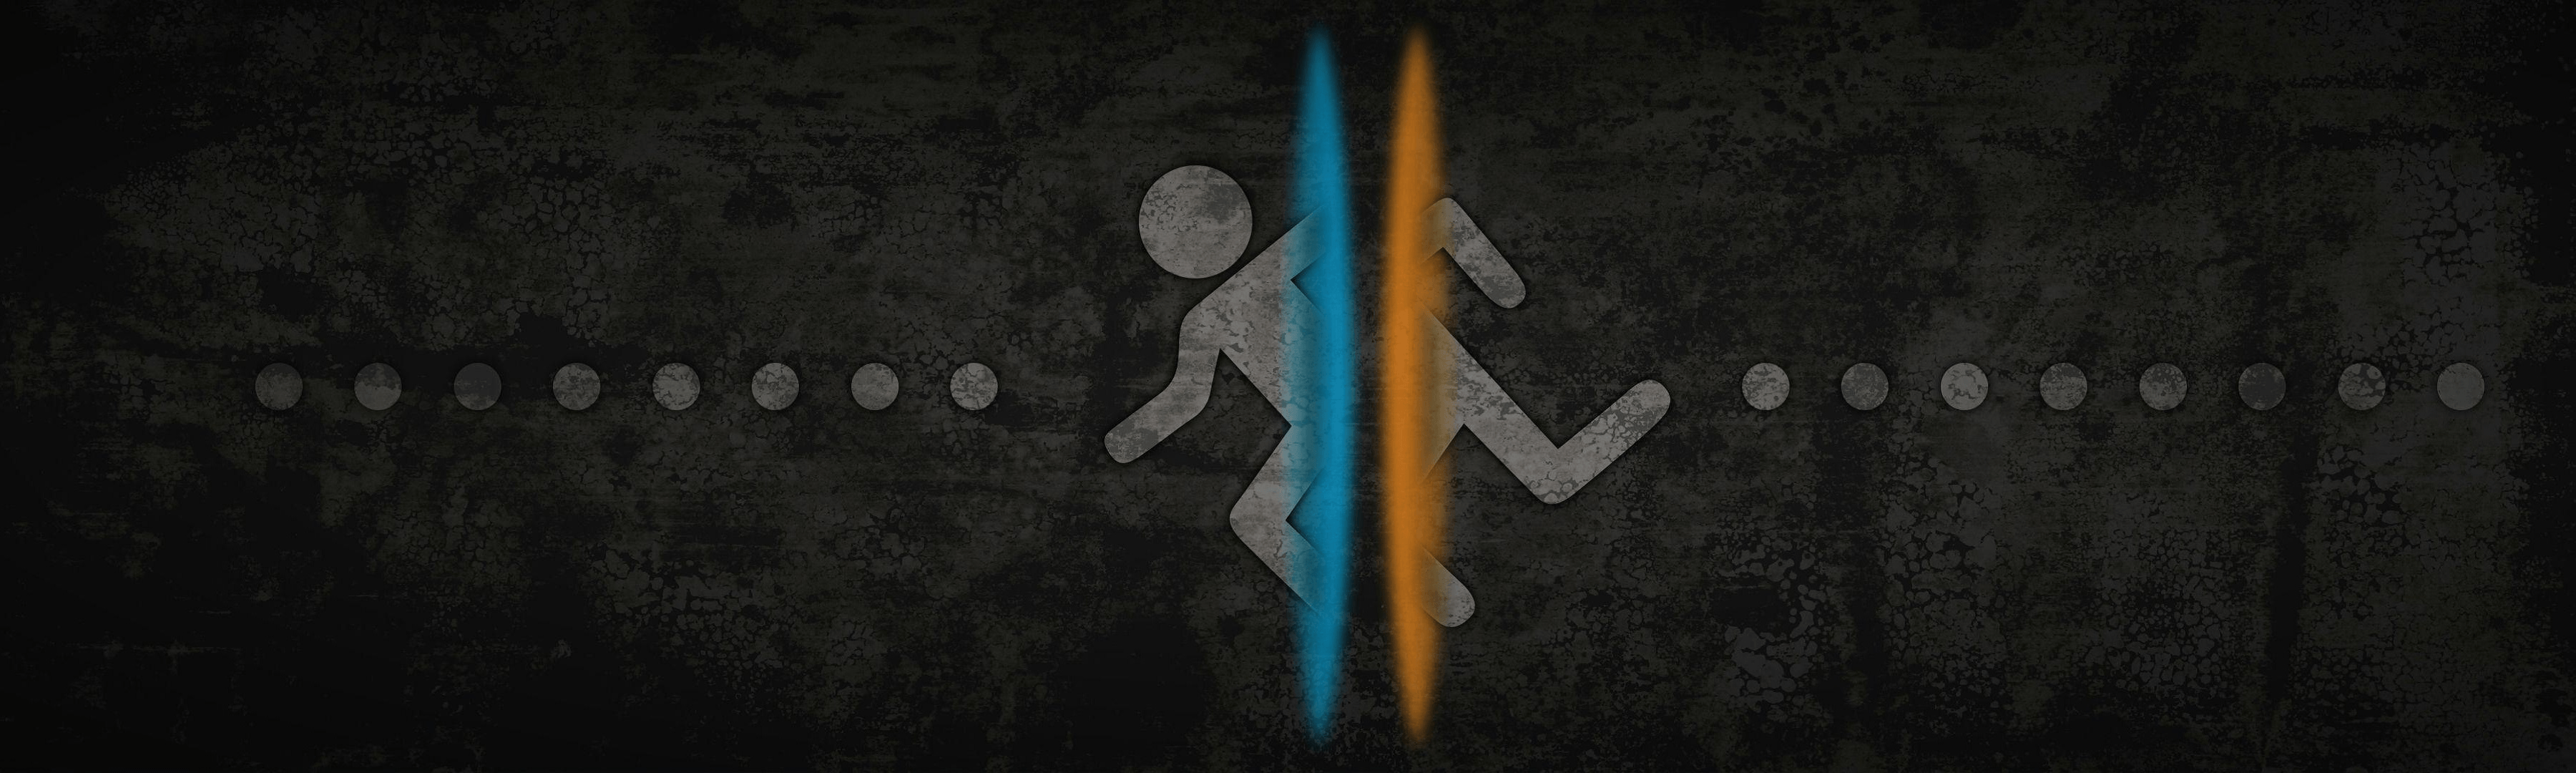 Wallpaper For Double Monitors (25)